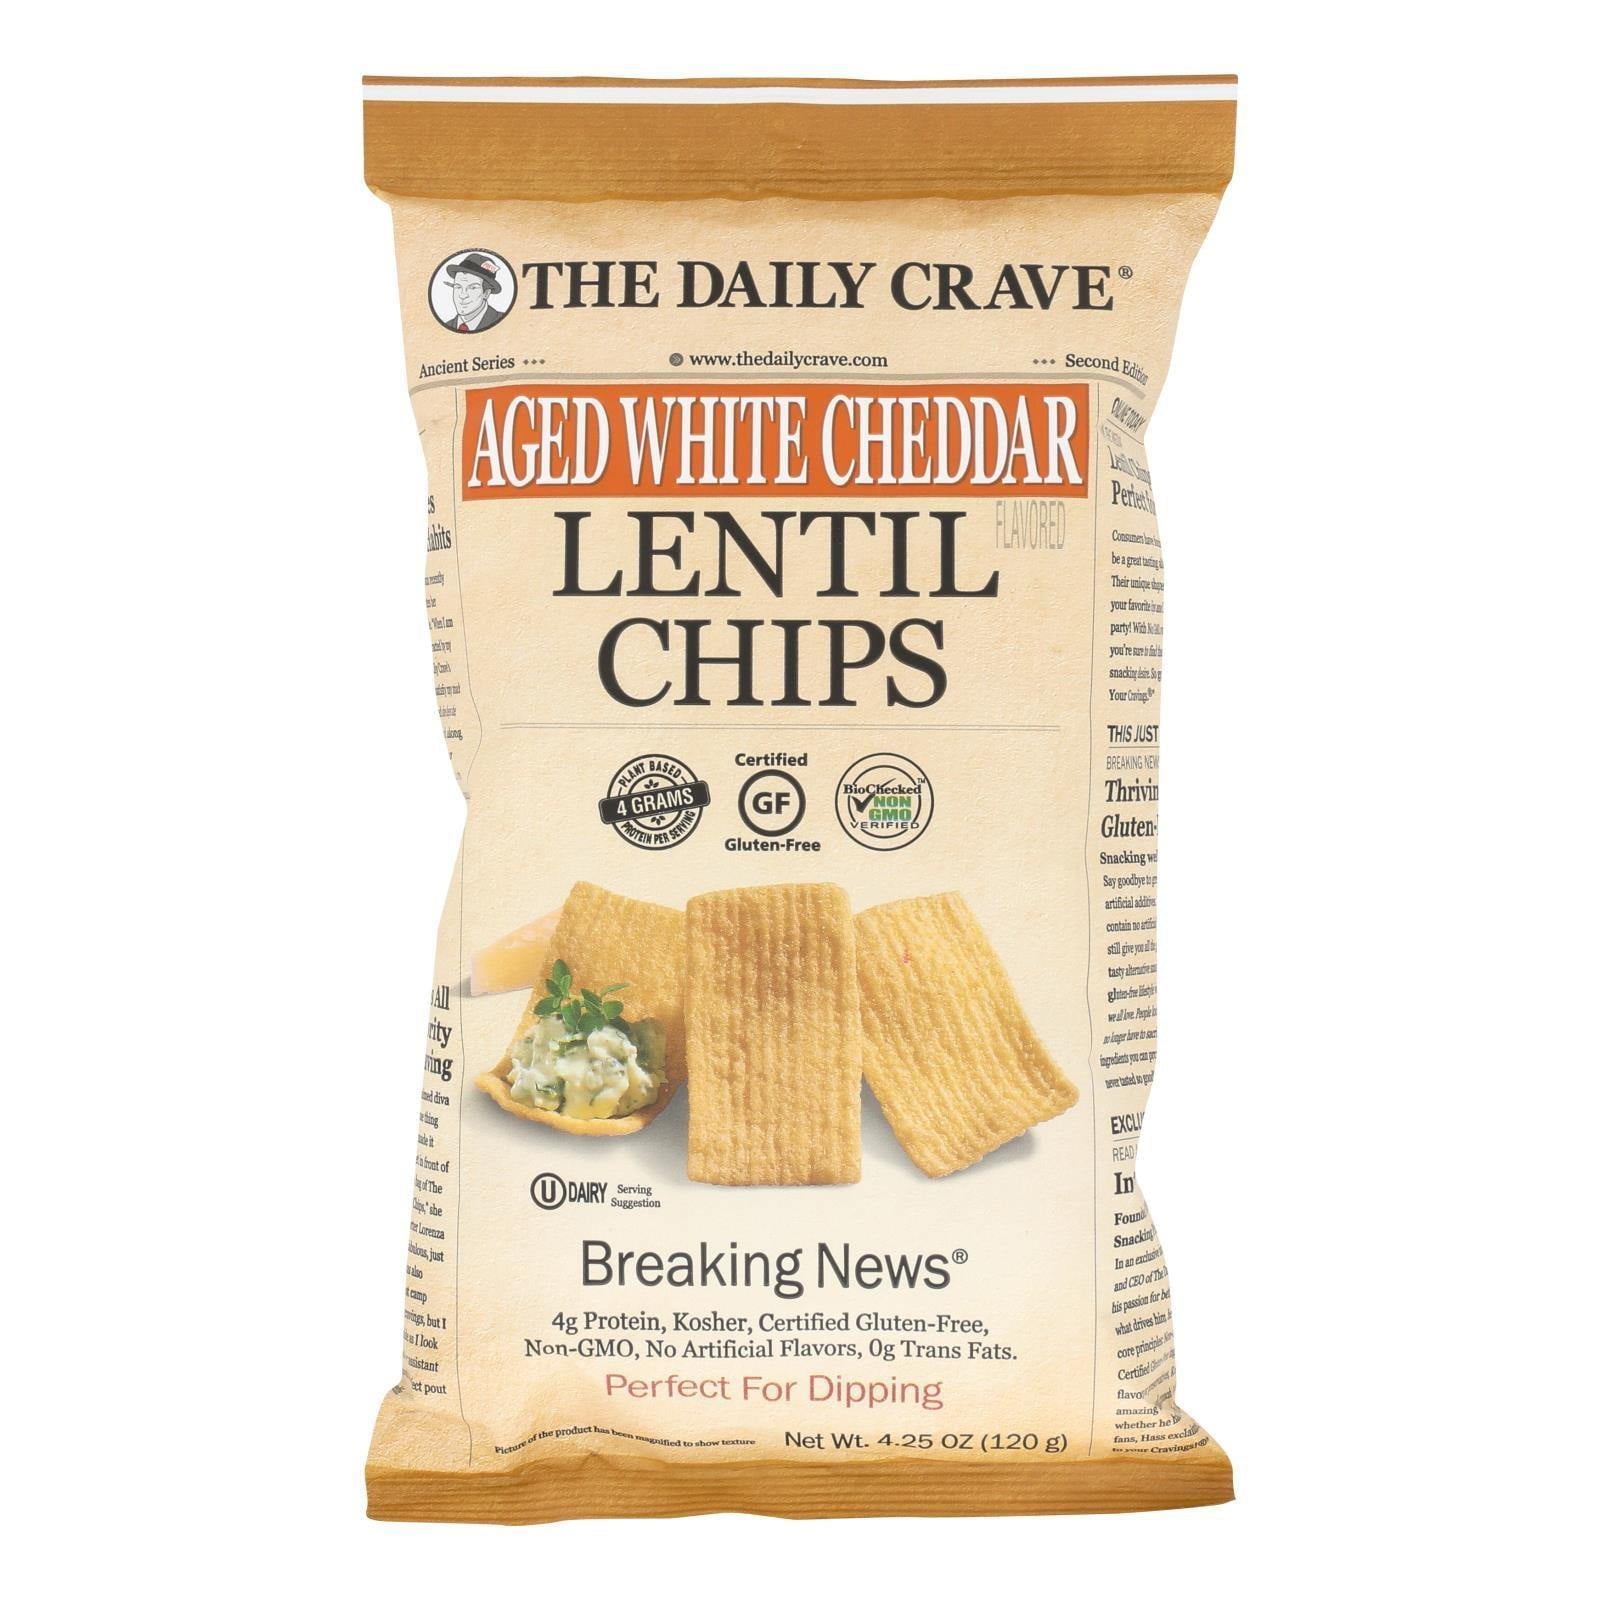 The Daily Crave Chip Lentil Aged Wheat Cheddar 5 Oz